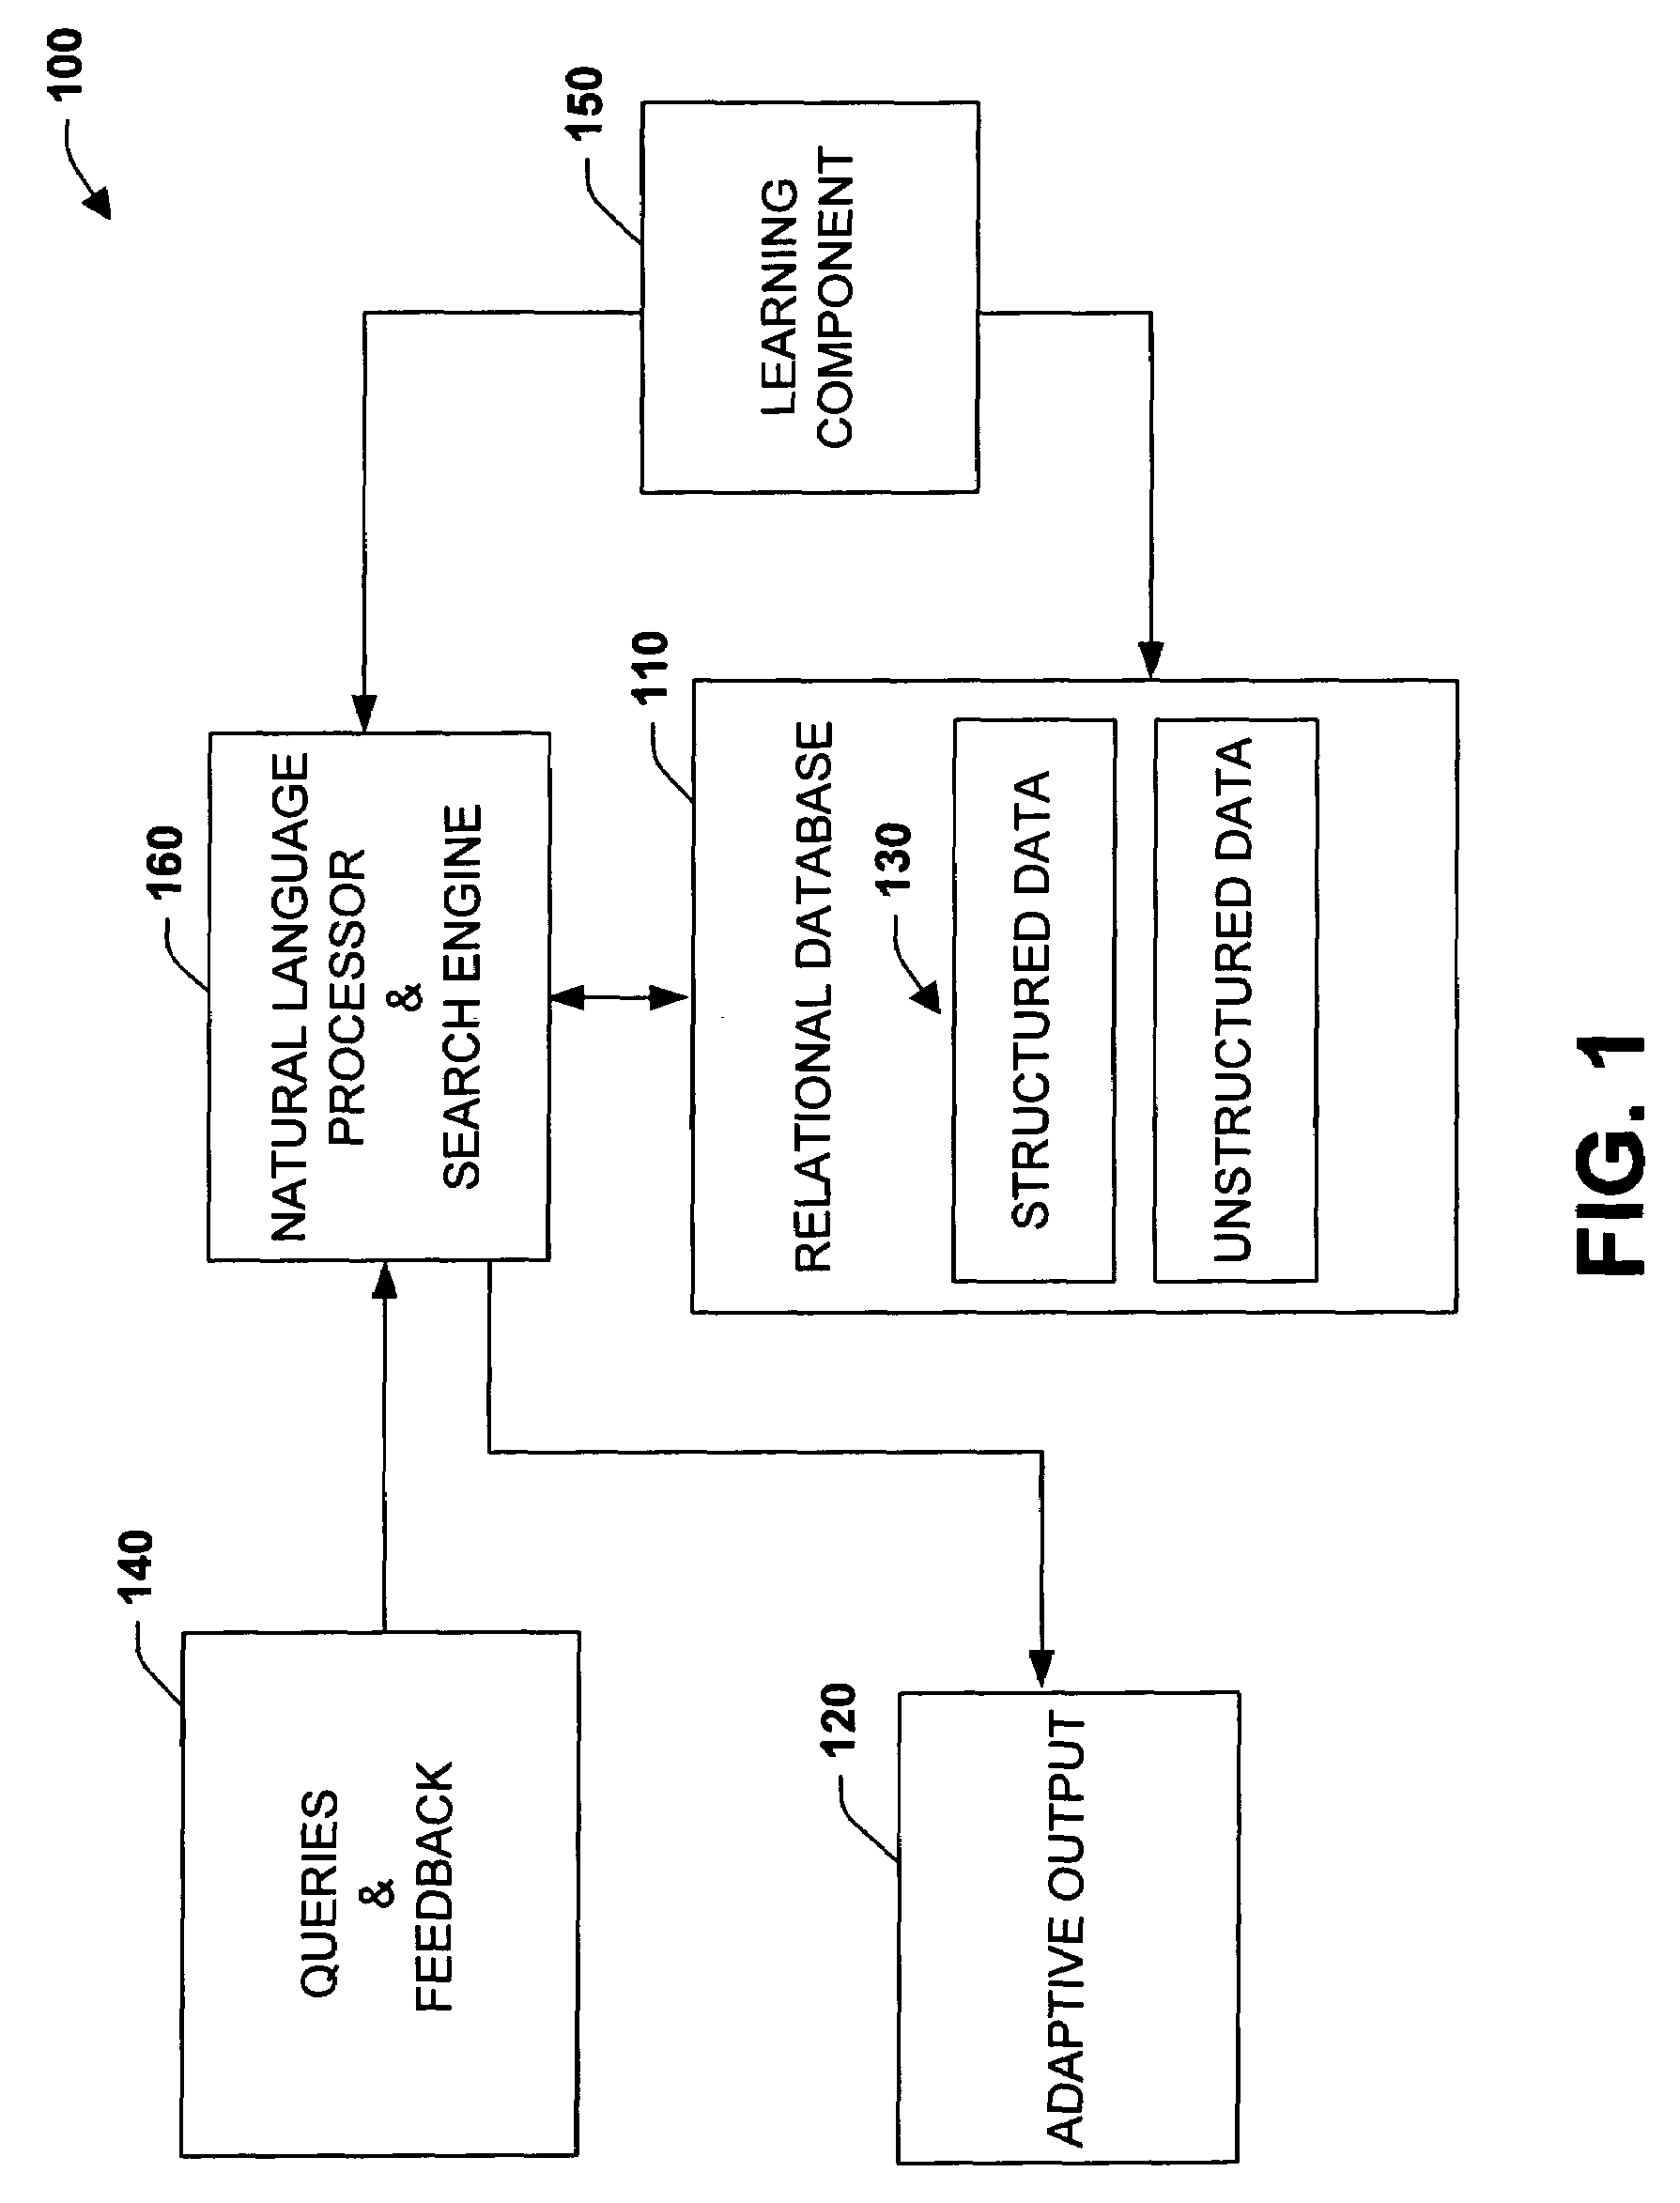 High scale adaptive search systems and methods